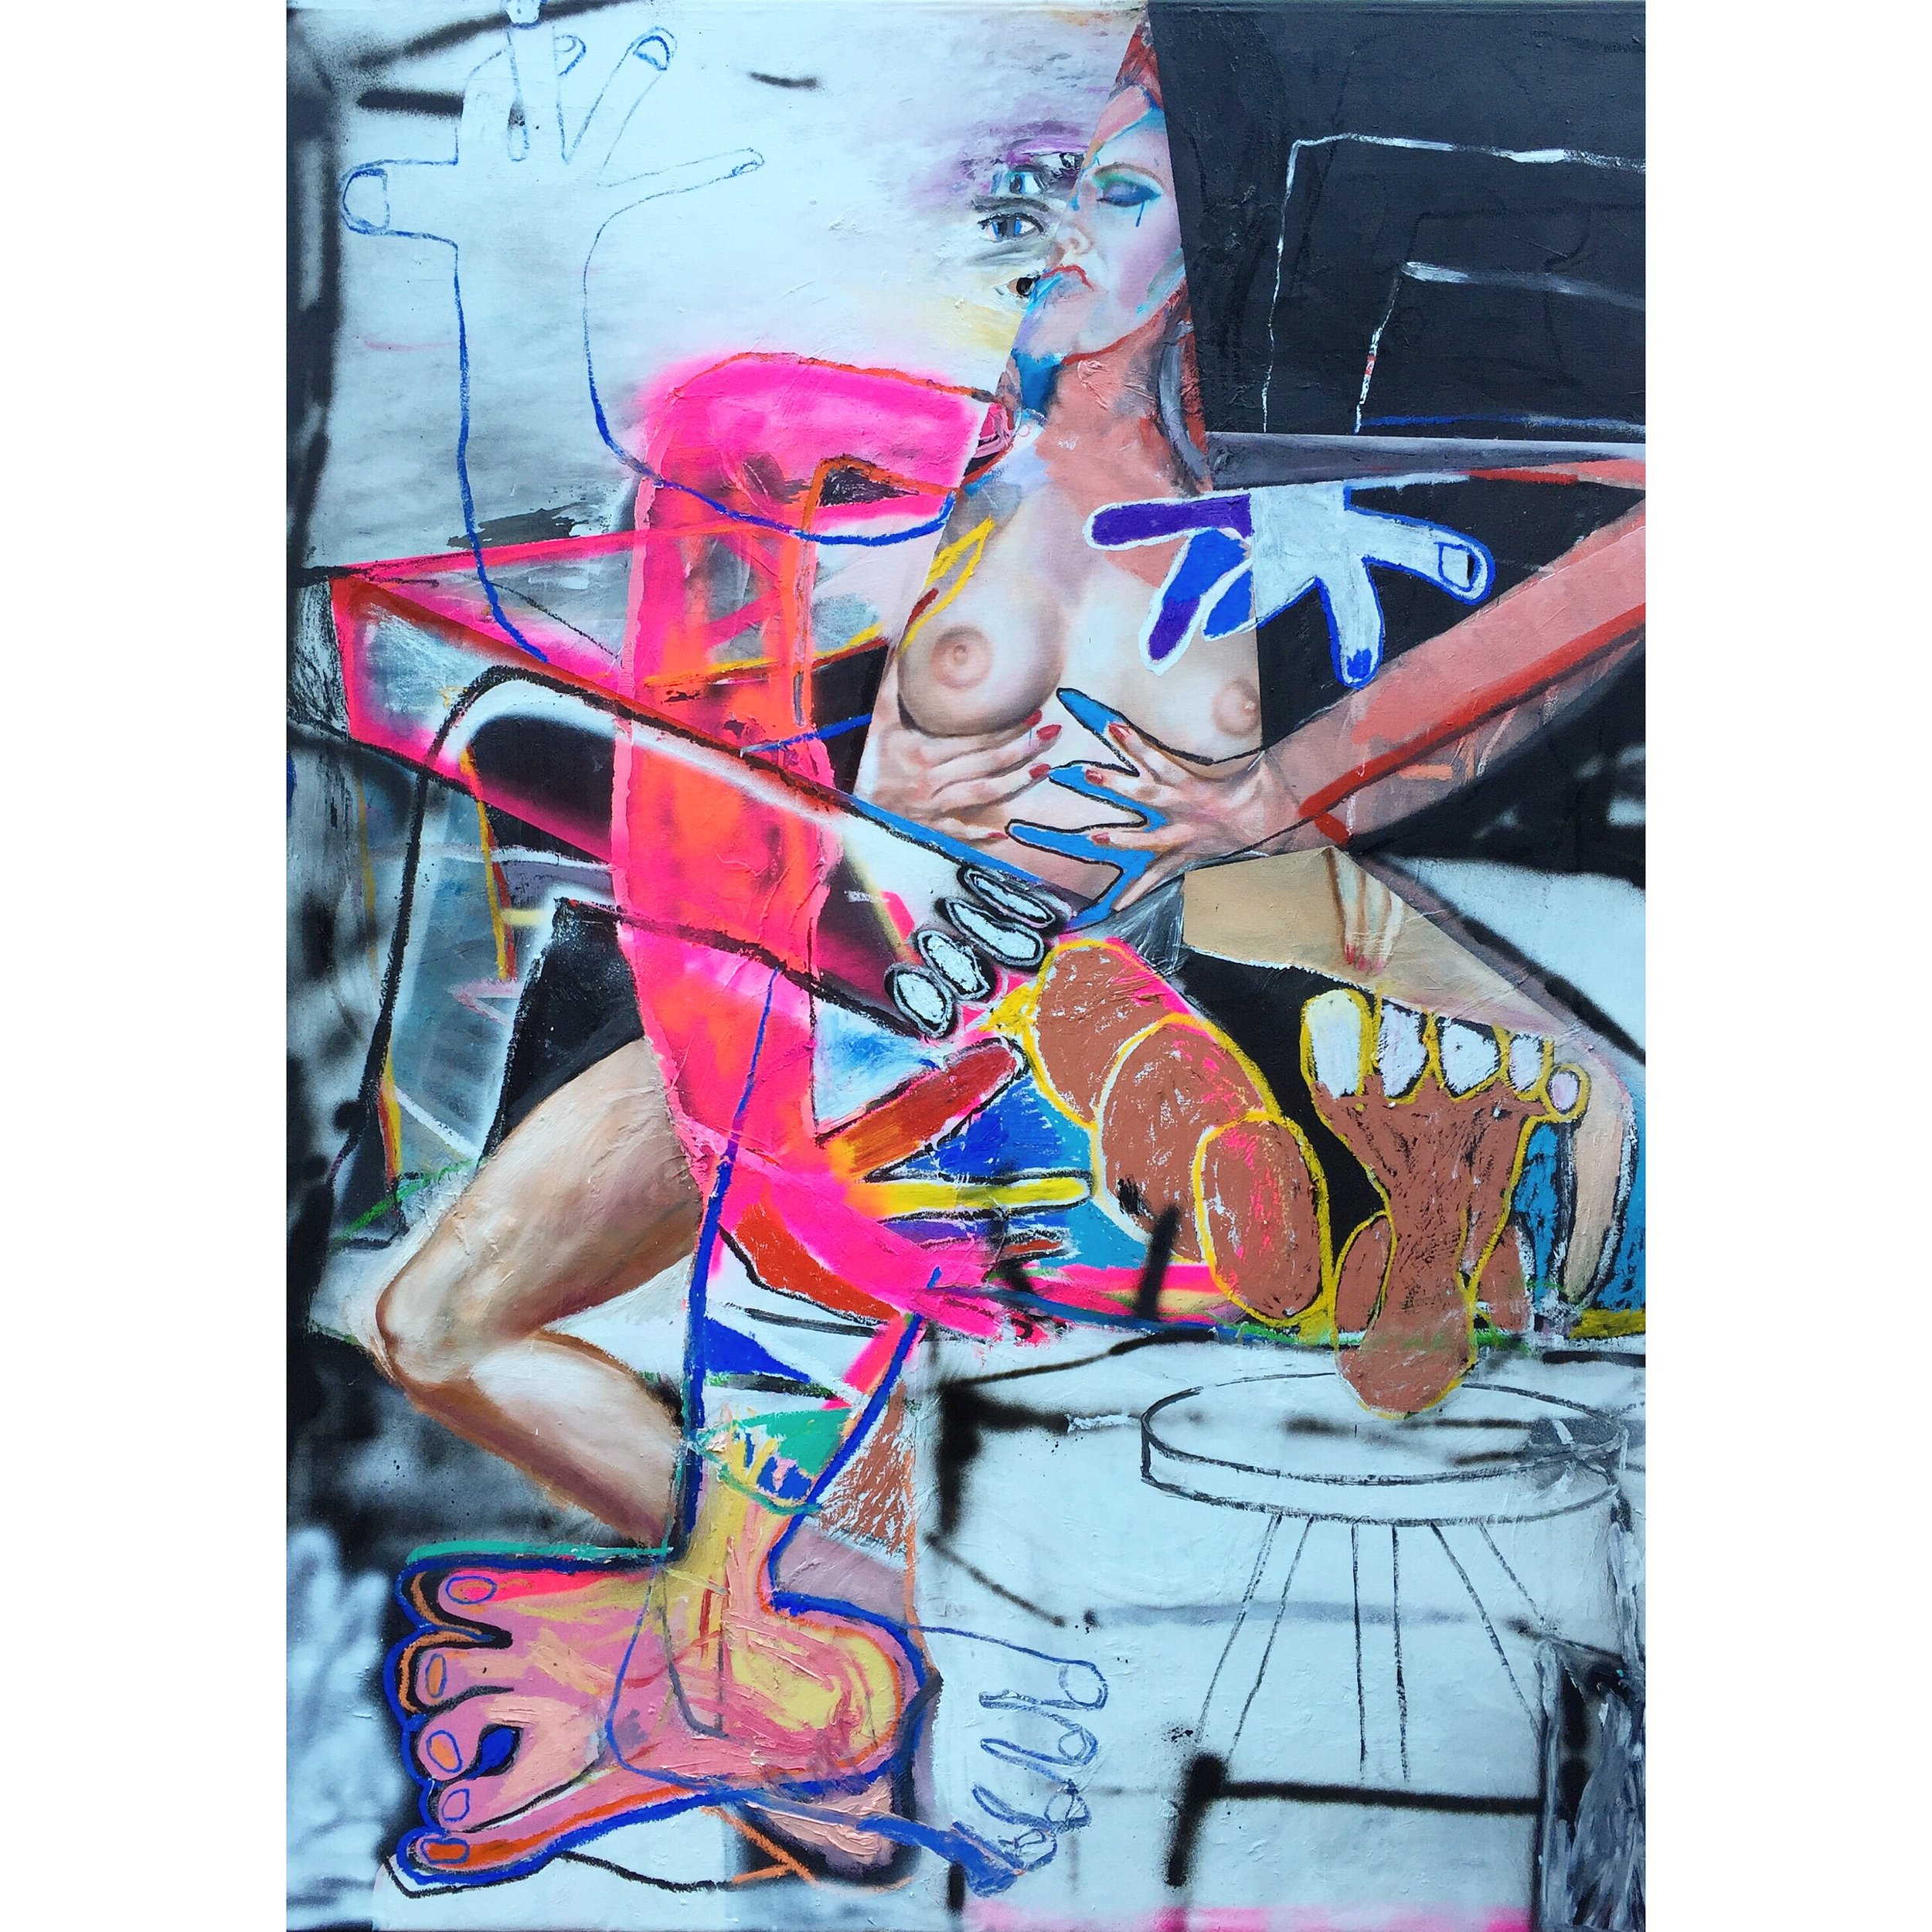  Oil, Oil Stick, Acrylic, and Spray Paint on Canvas  71 x 51 in  180 x 130 cm 